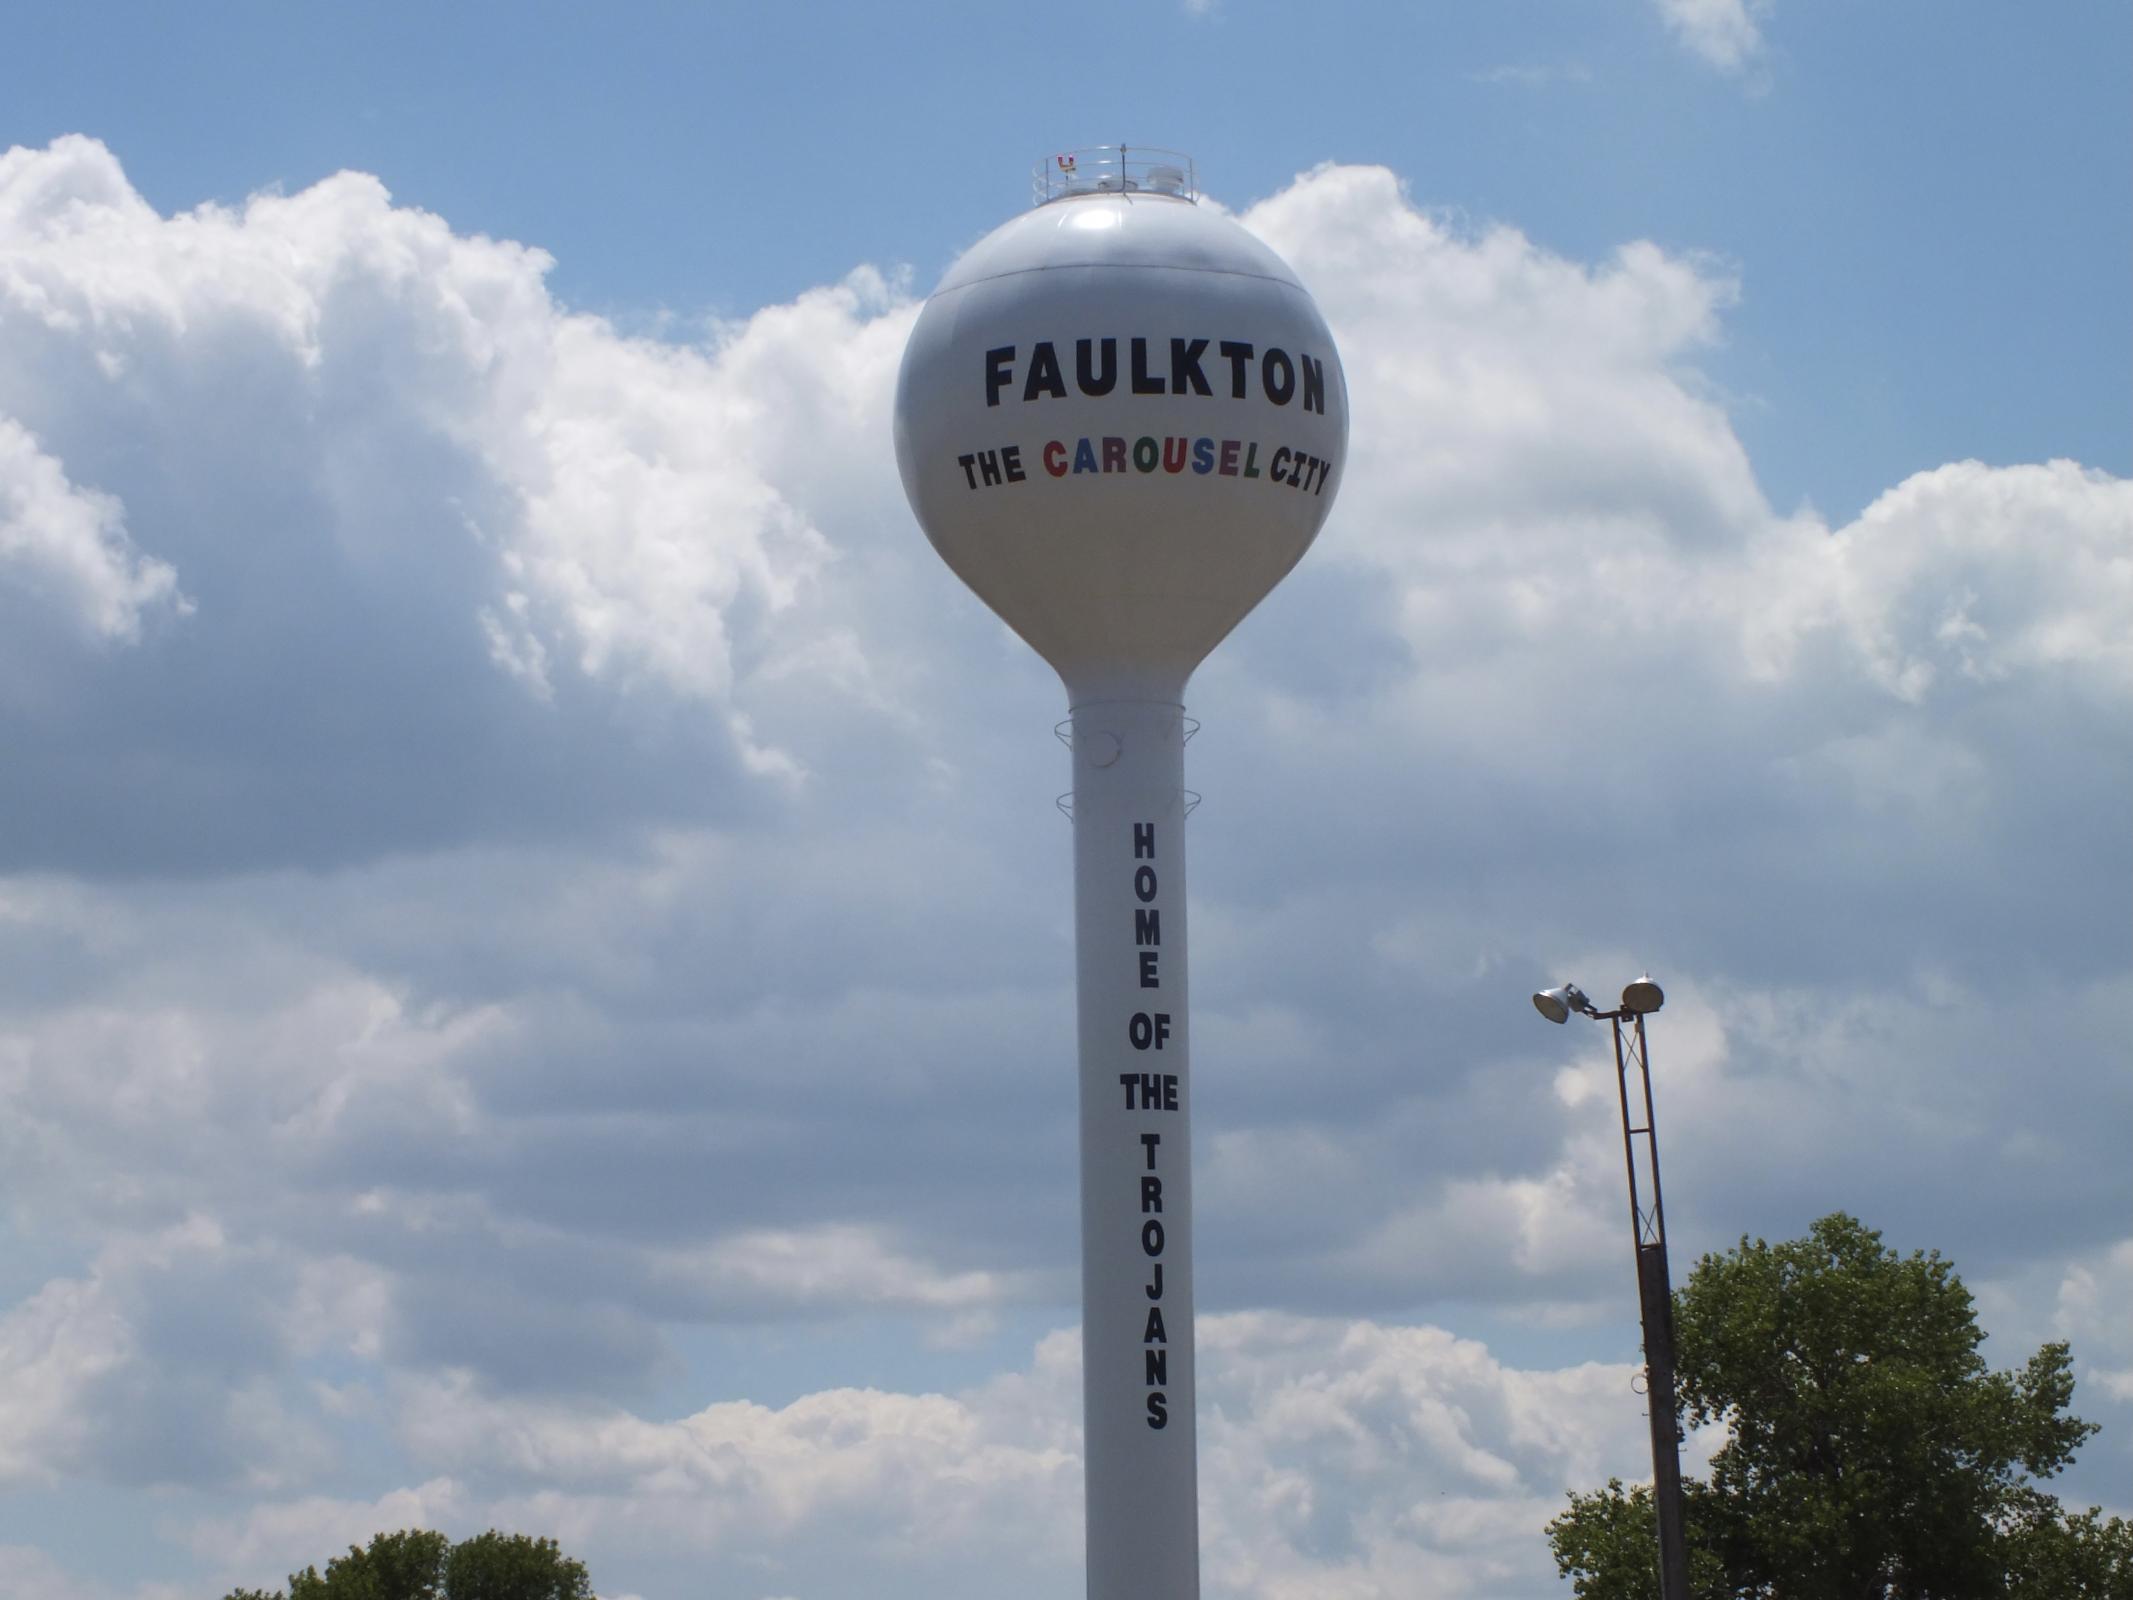 City Water Tower's image